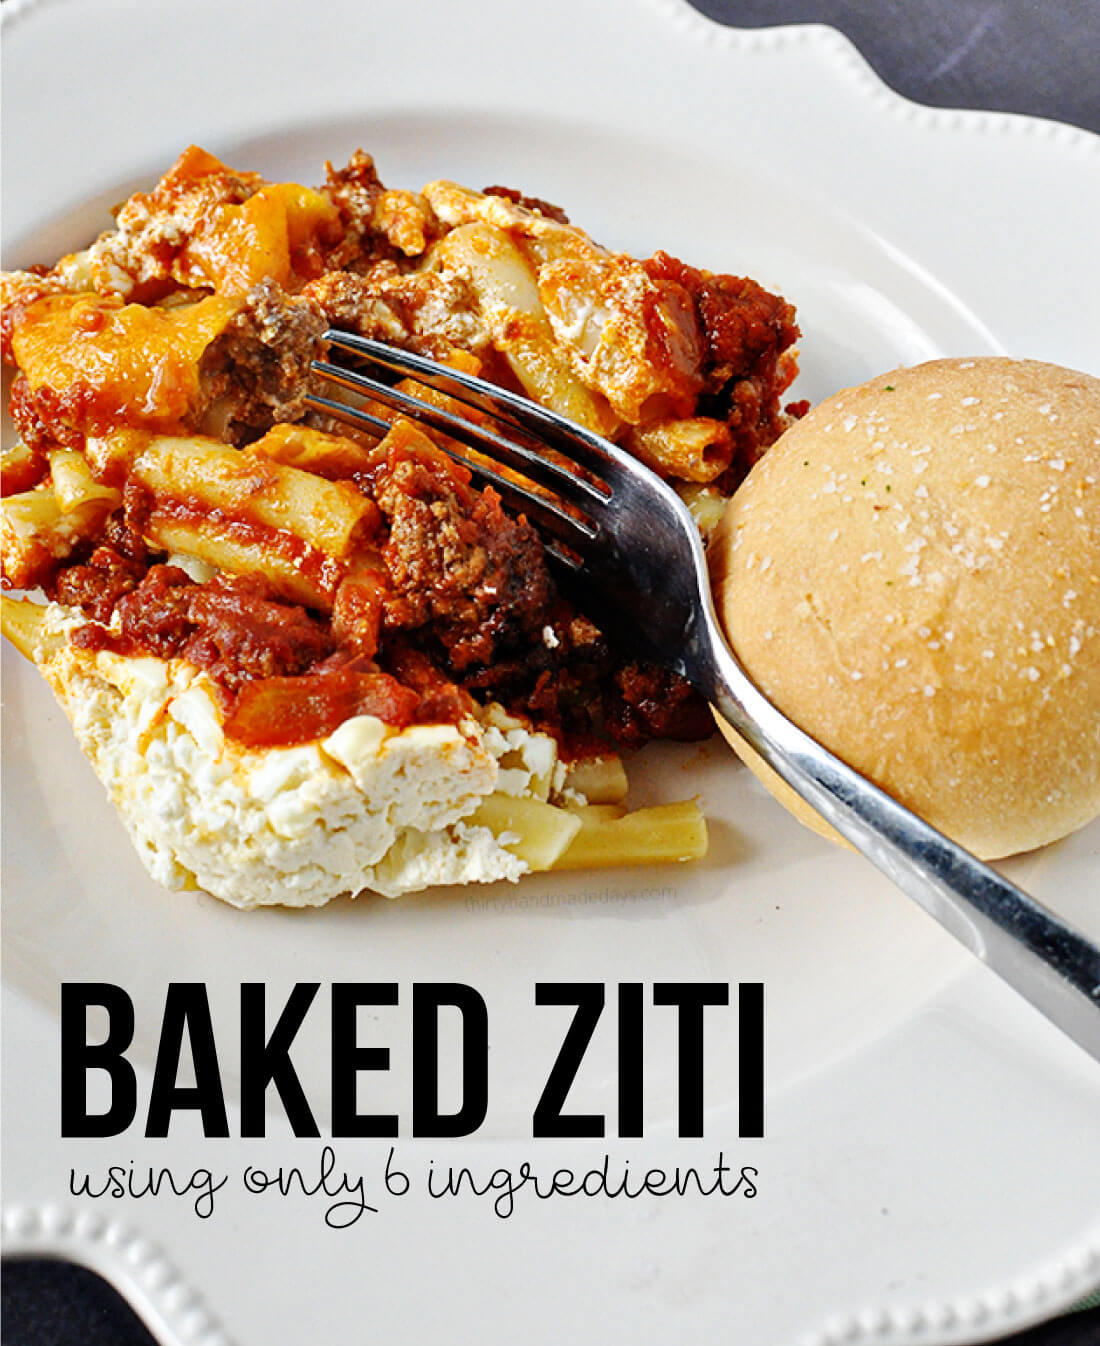 Baked Ziti - the easiest main dish to make using only 6 ingredients